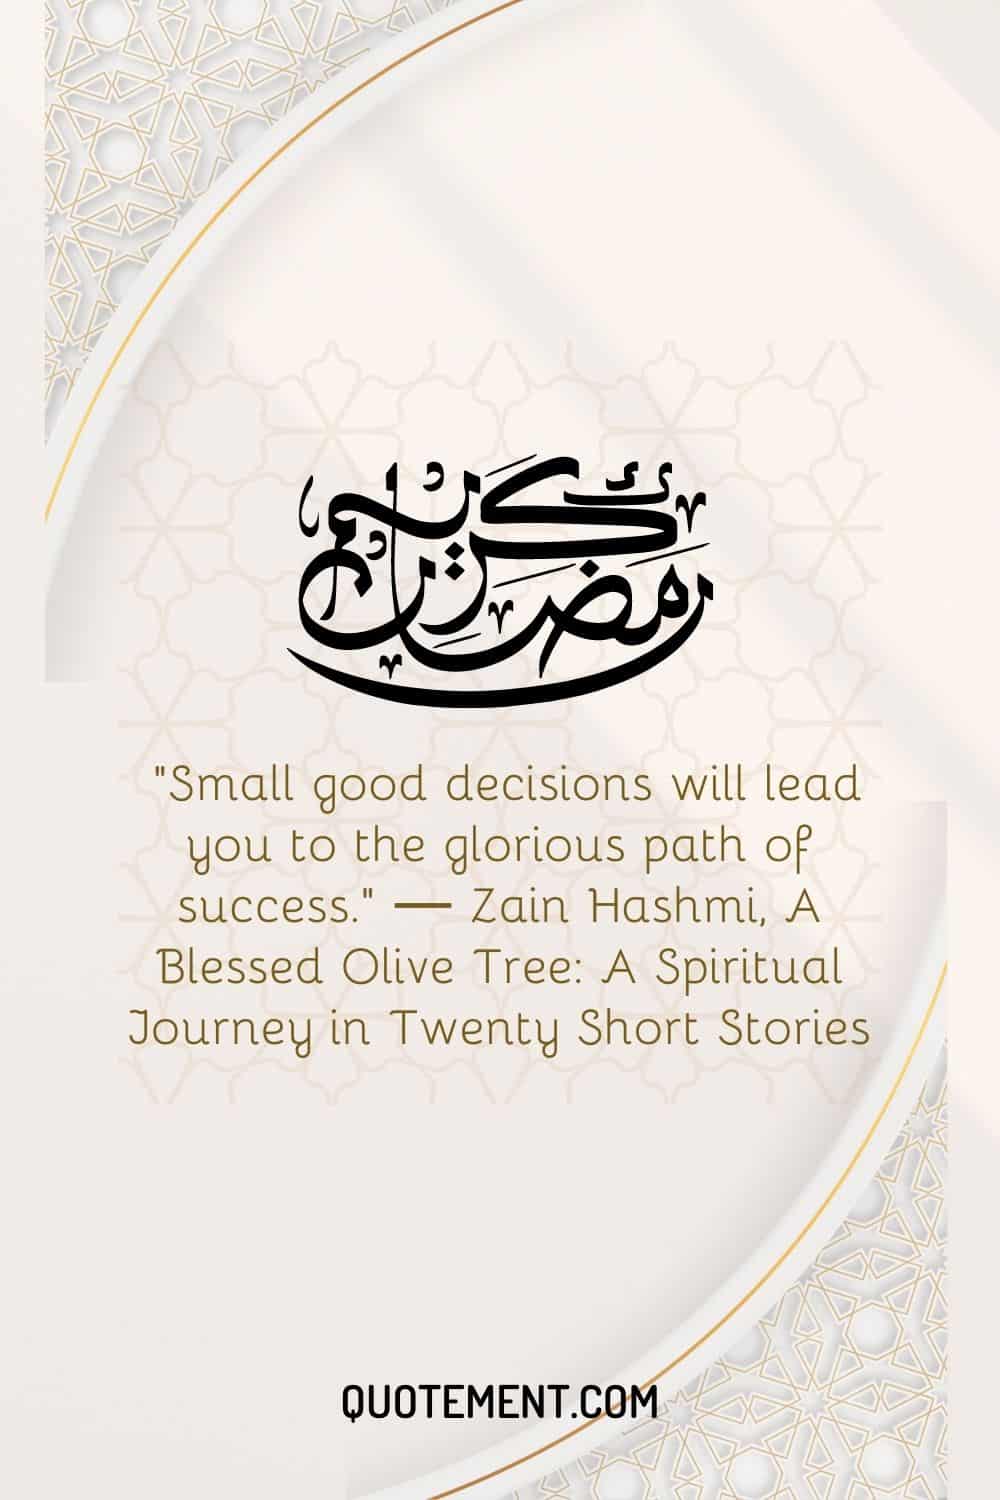 Small good decisions will lead you to the glorious path of success